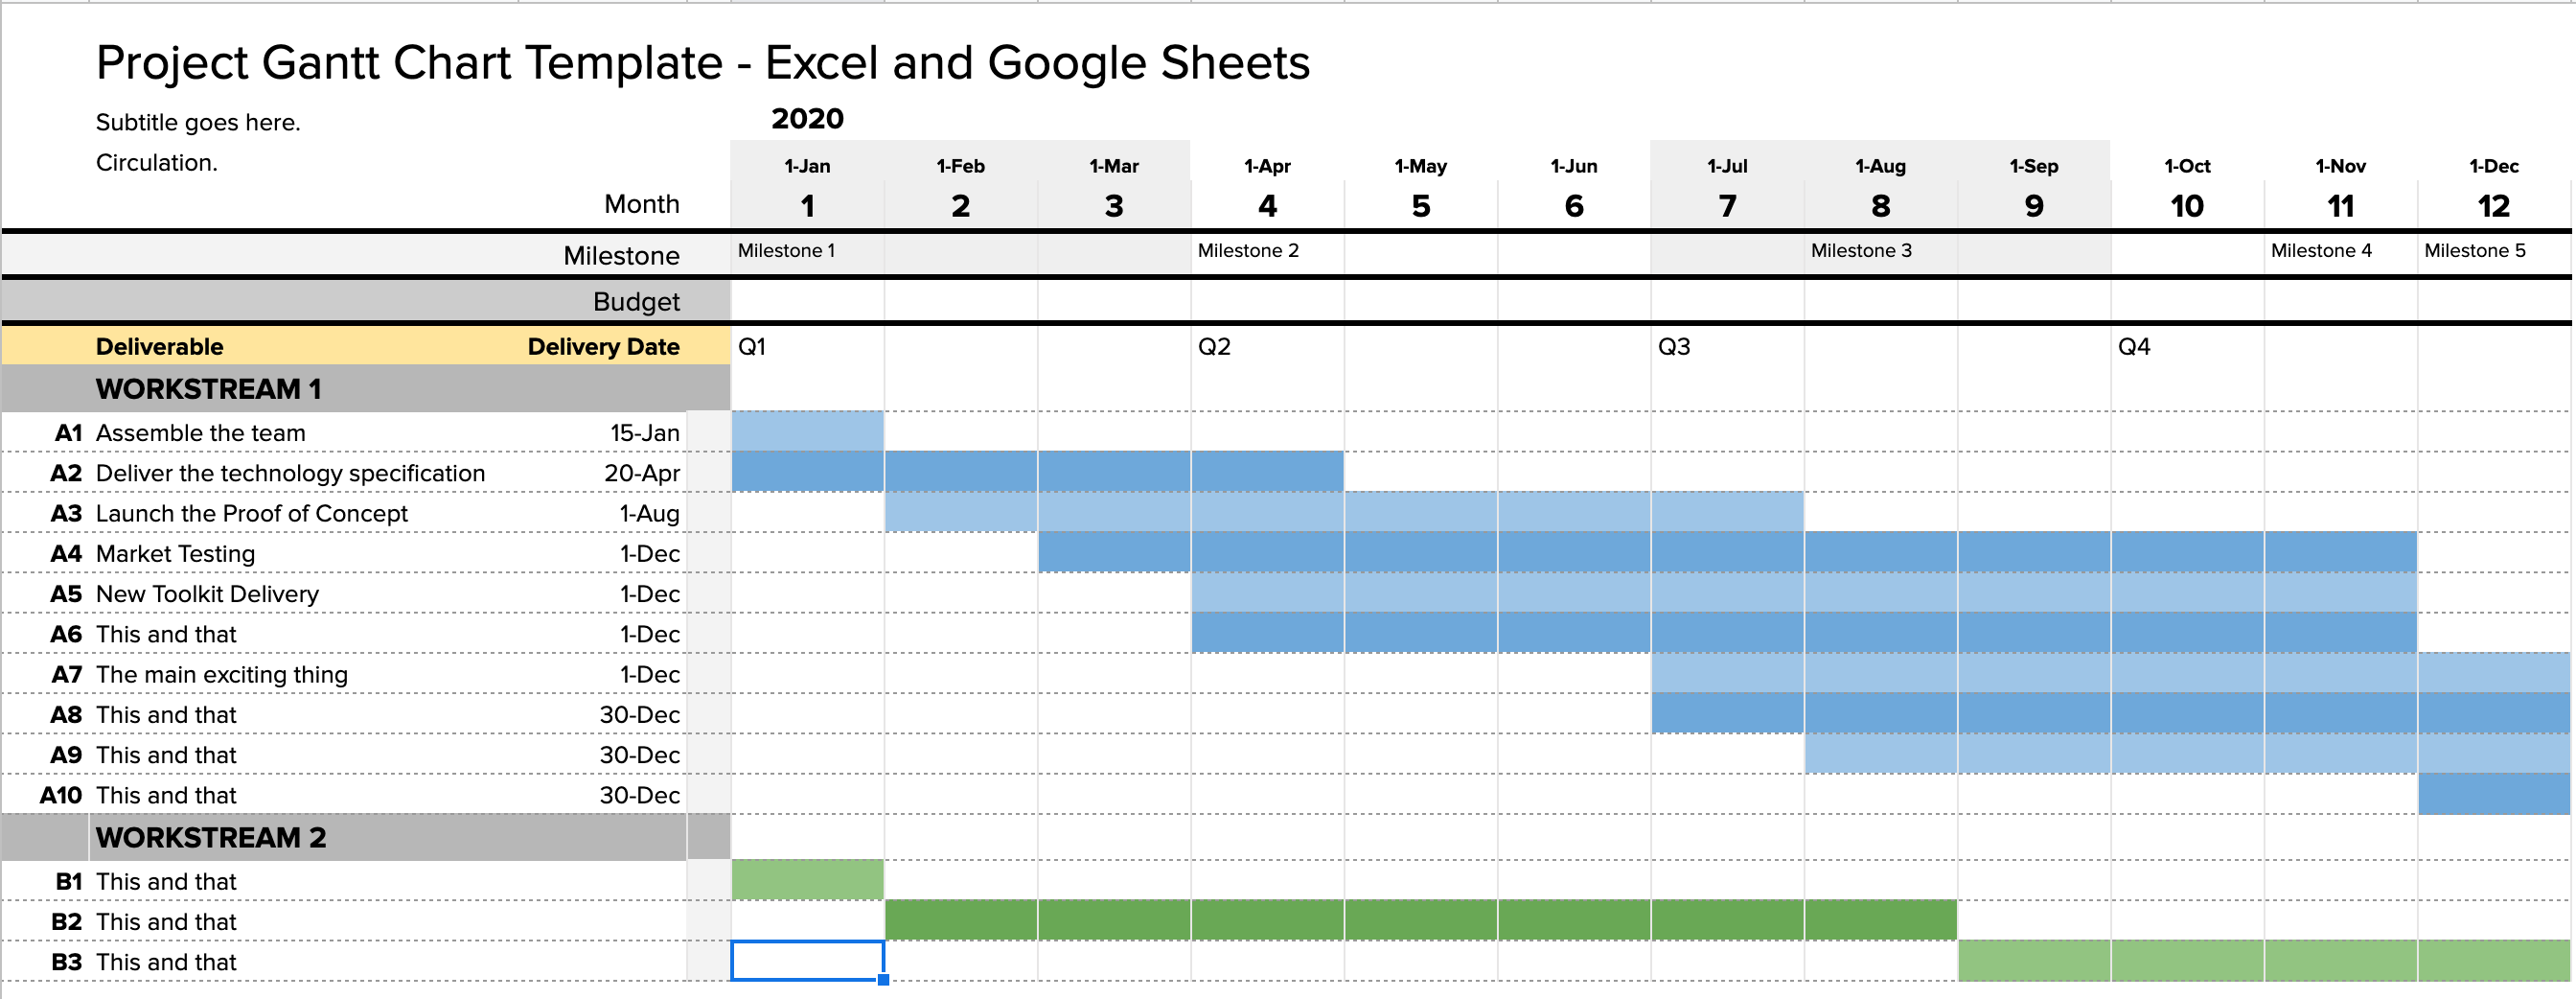 Gantt Chart Template for Excel and Google Sheets